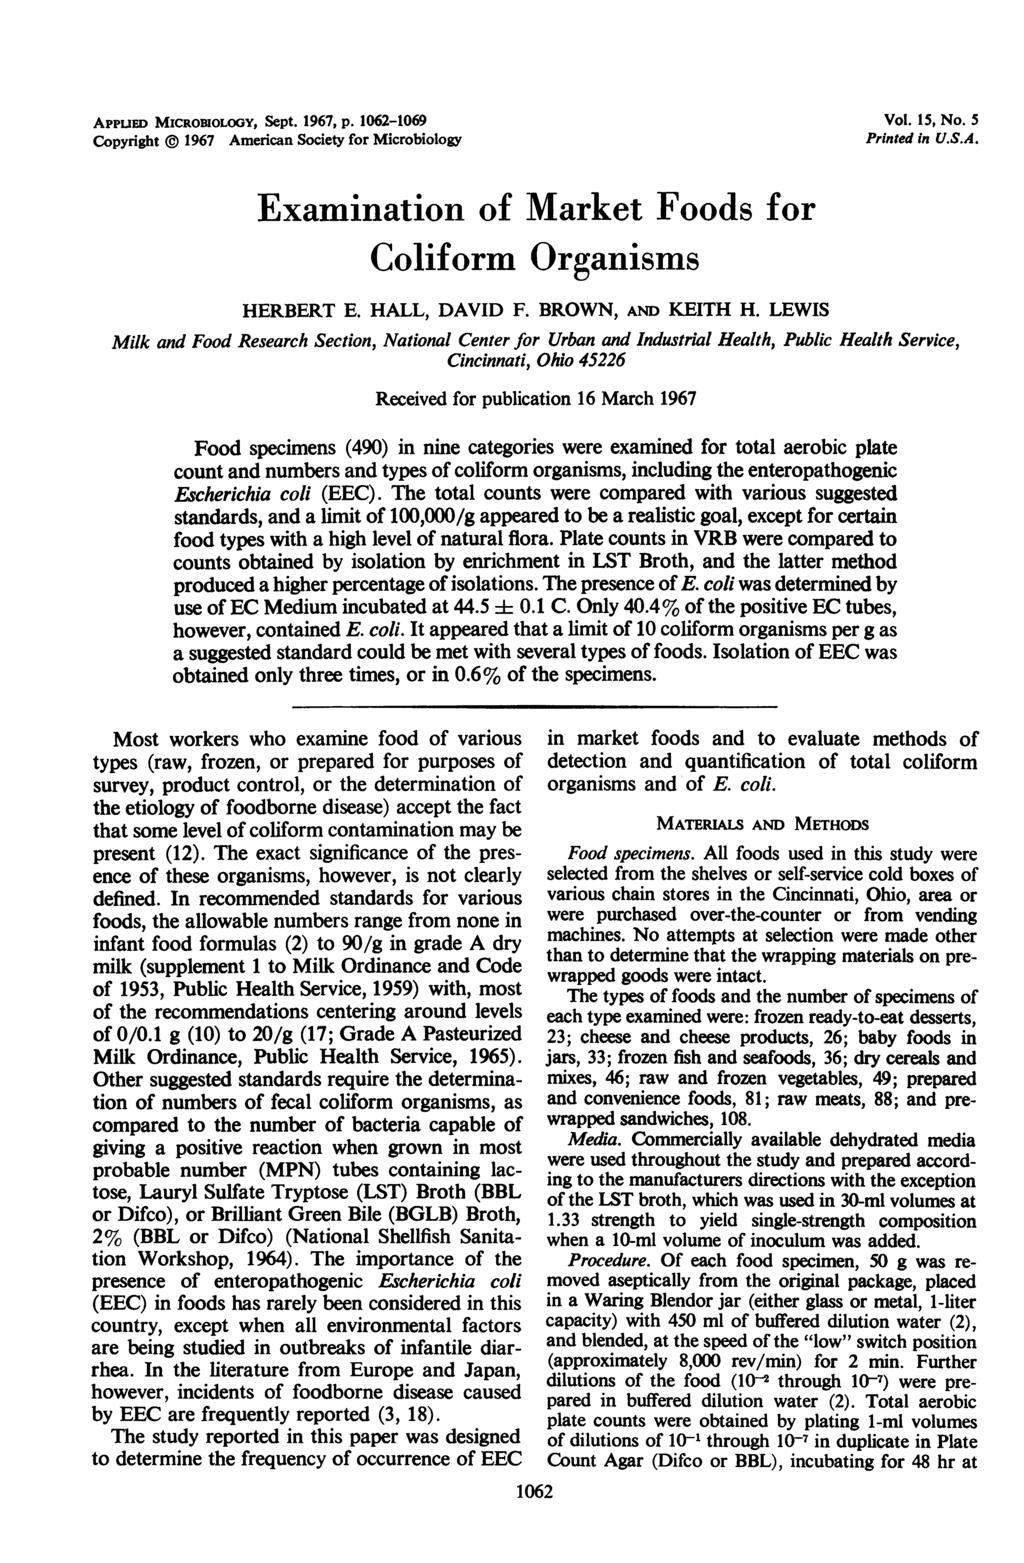 APPuED MICROmoLOGY, Sept. 1967, p. 1062-1069 Copyright 1967 American Society for Microbiology Vol. 15, No. 5 Printed in U.S.A. Examination of Market Foods for Coliform Organisms HERBERT E.